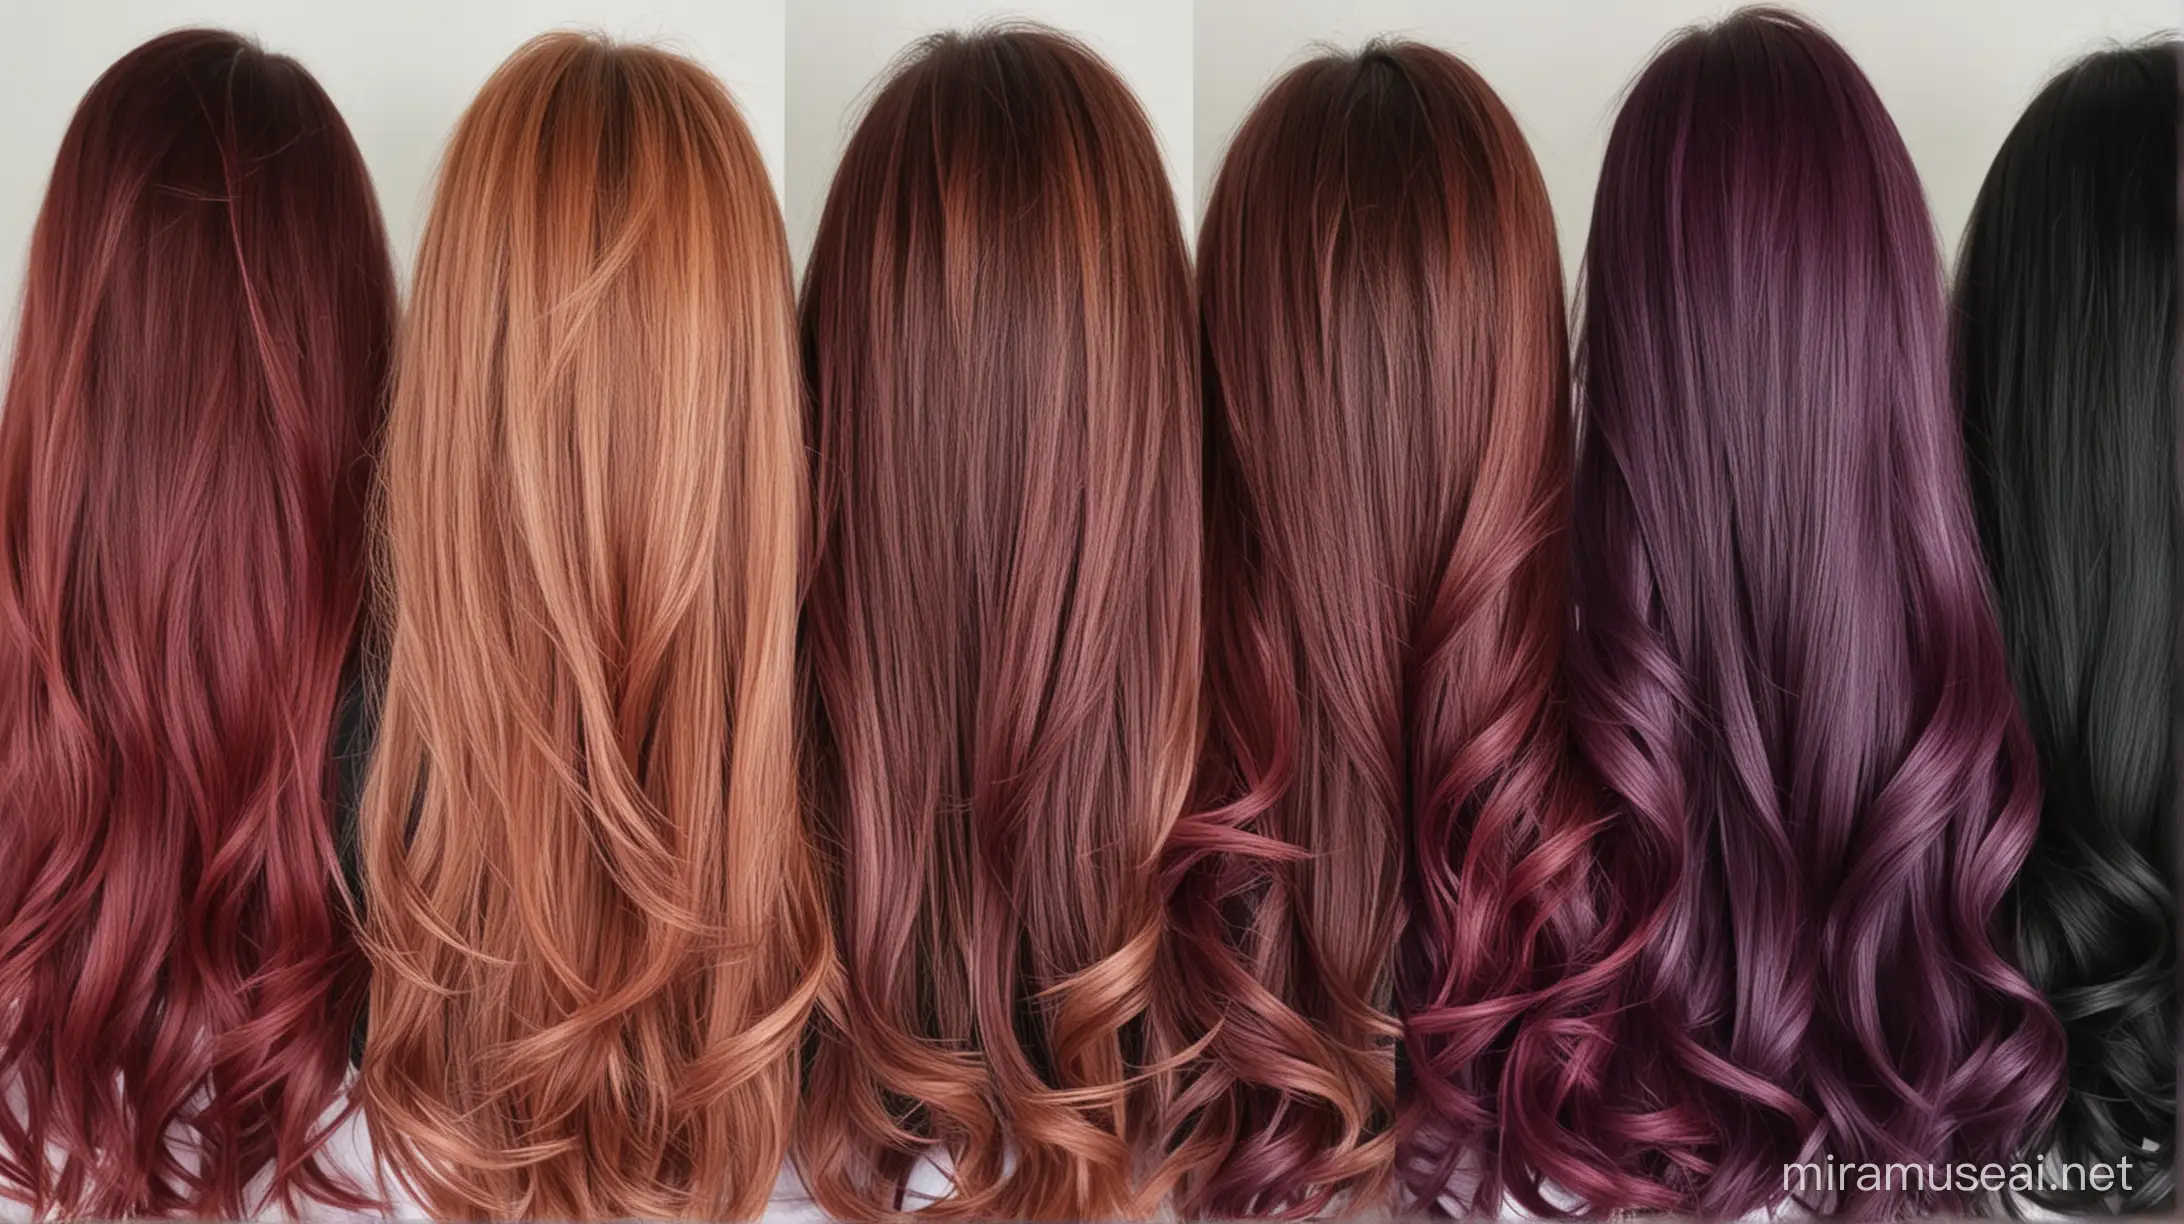 Varieties of Hair Dyes Exploring Shades and Styles